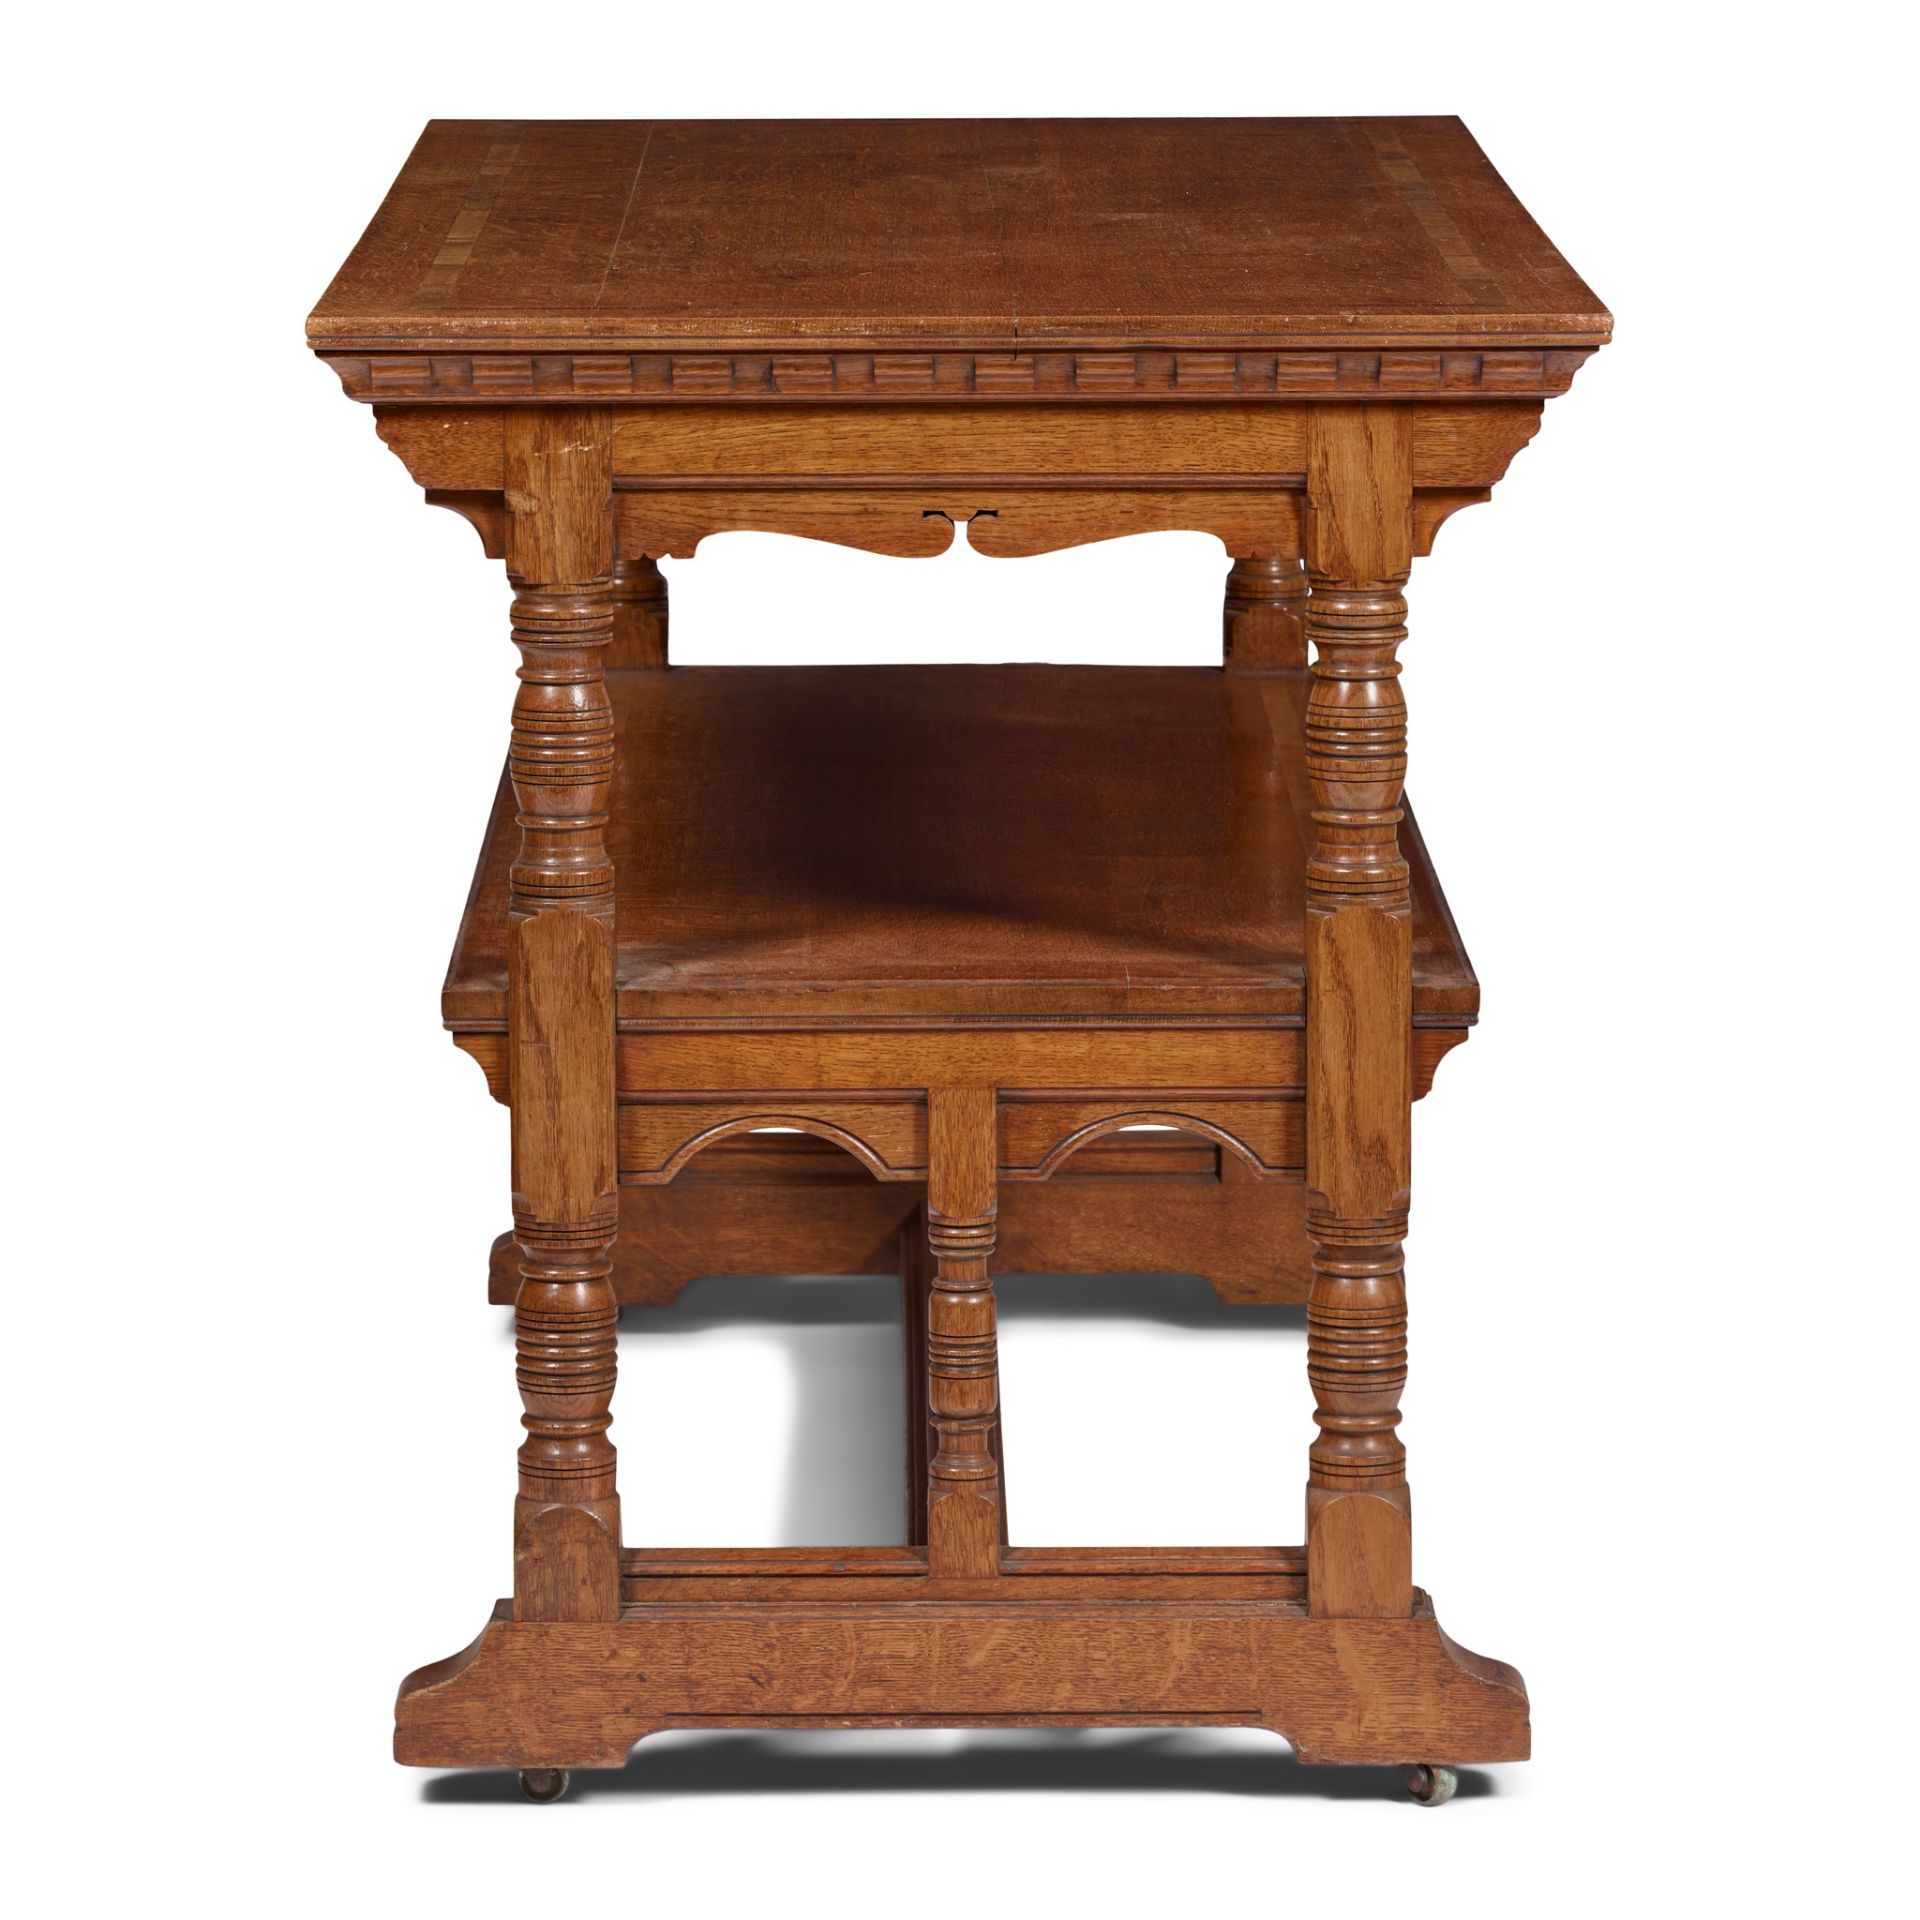 BRUCE J. TALBERT (1838-1881) FOR GILLOW & CO. AESTHETIC MOVEMENT BUFFET, CIRCA 1880 - Image 2 of 2